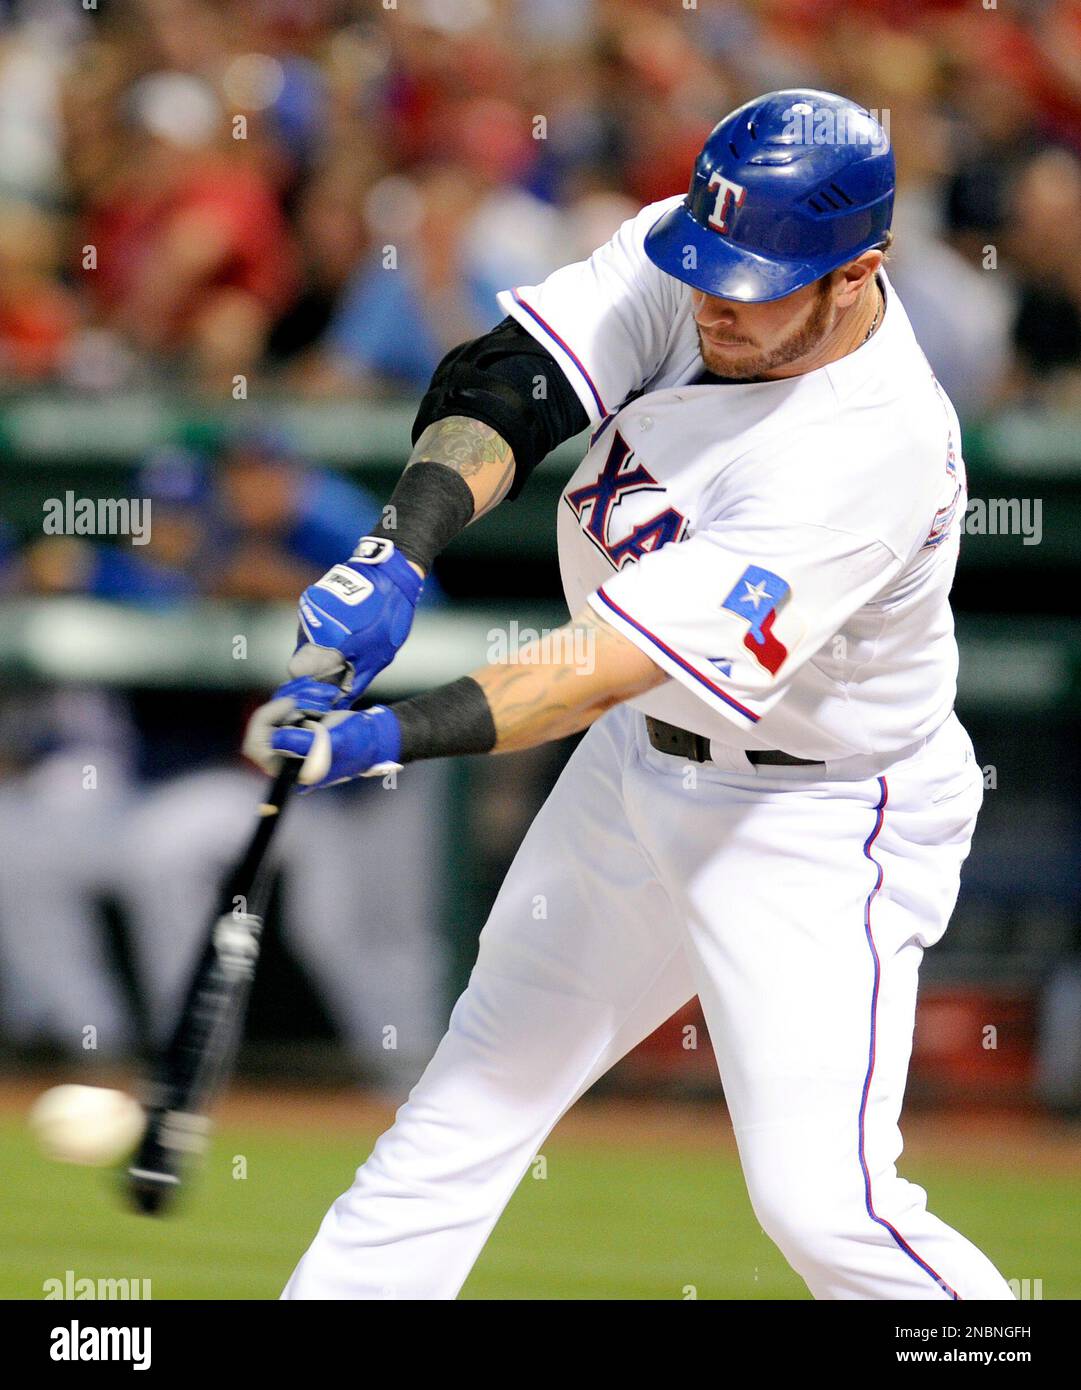 Texas Rangers' Josh Hamilton swings at a pitch in the fifth inning